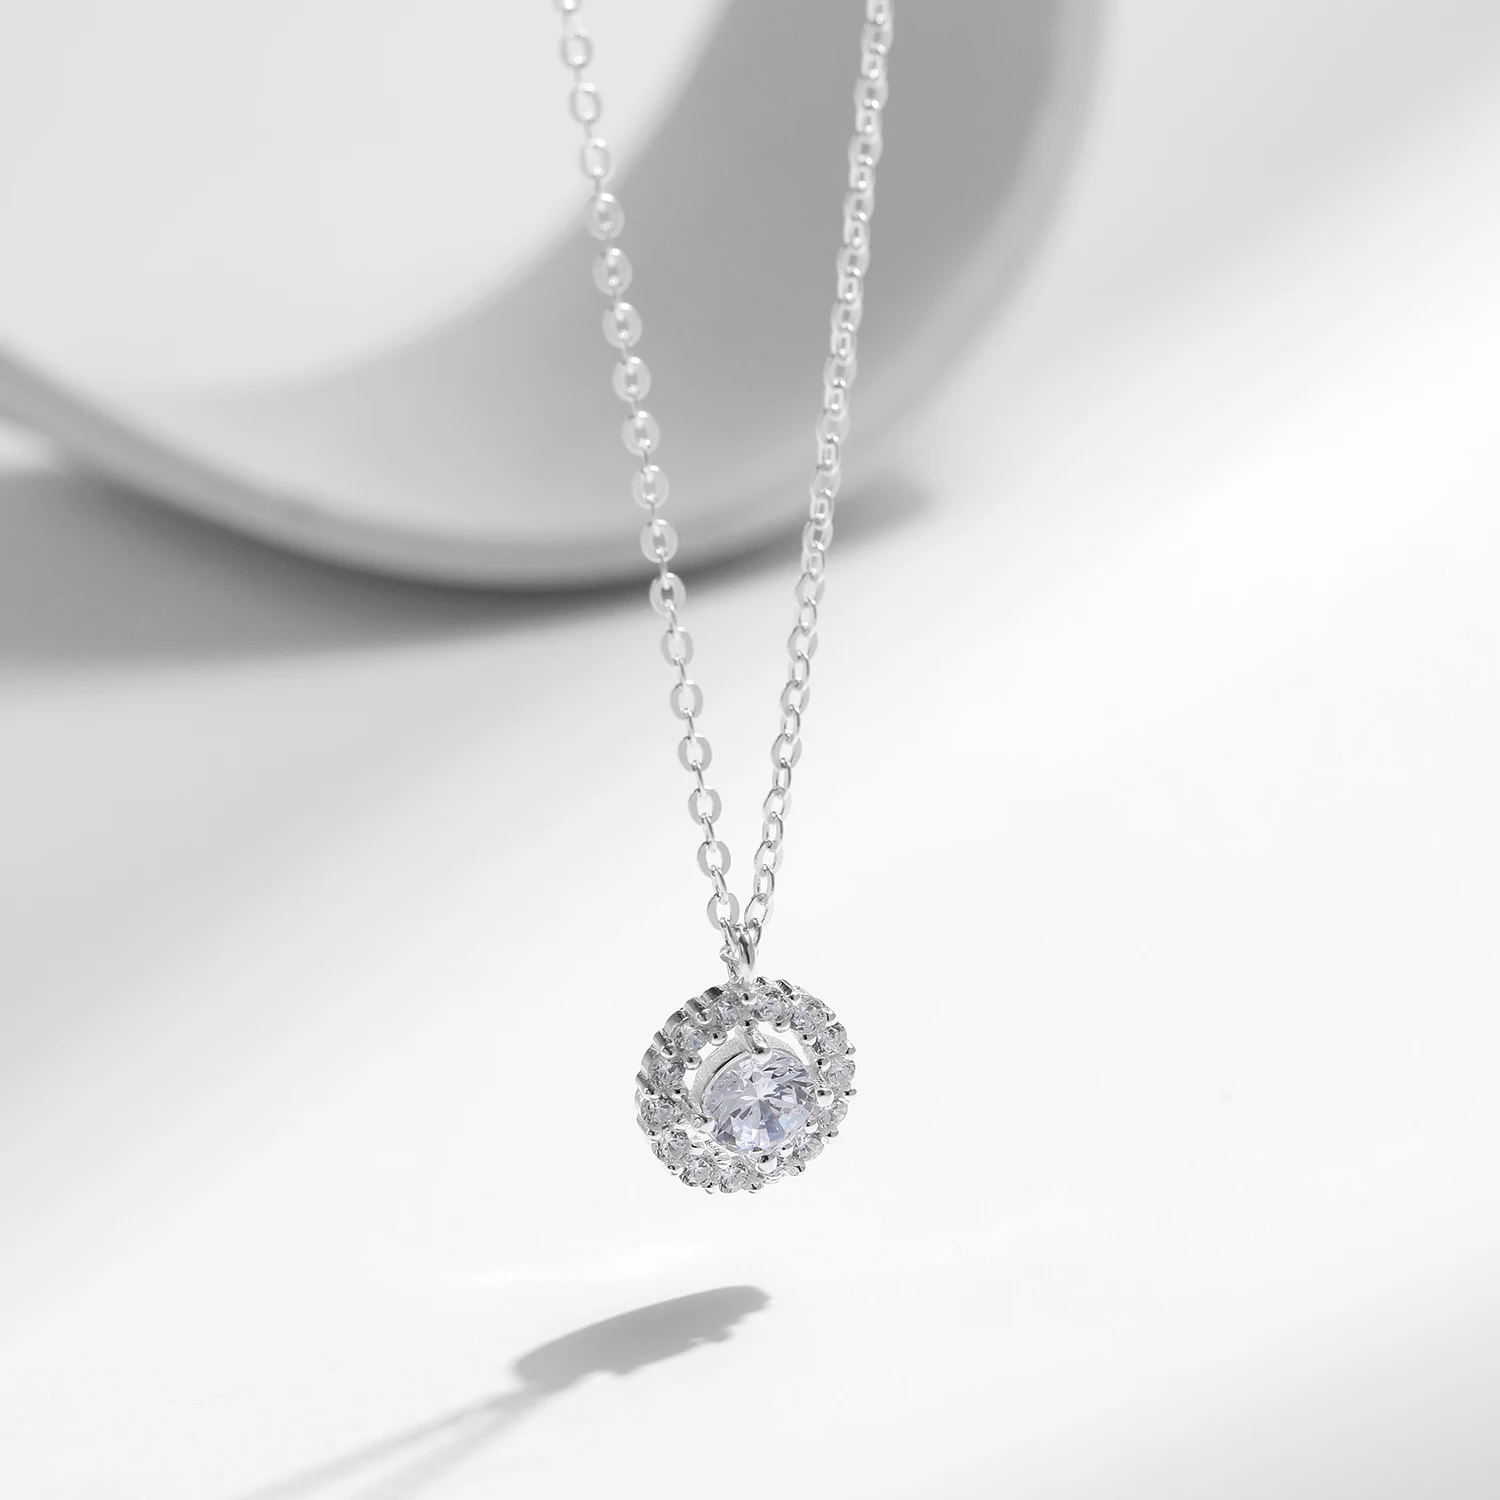 MODIAN 925 Sterling Silver Classic Sparkling Round High Quality Zirconia Wedding Pendant Necklace For Women Anniversary Jewelry